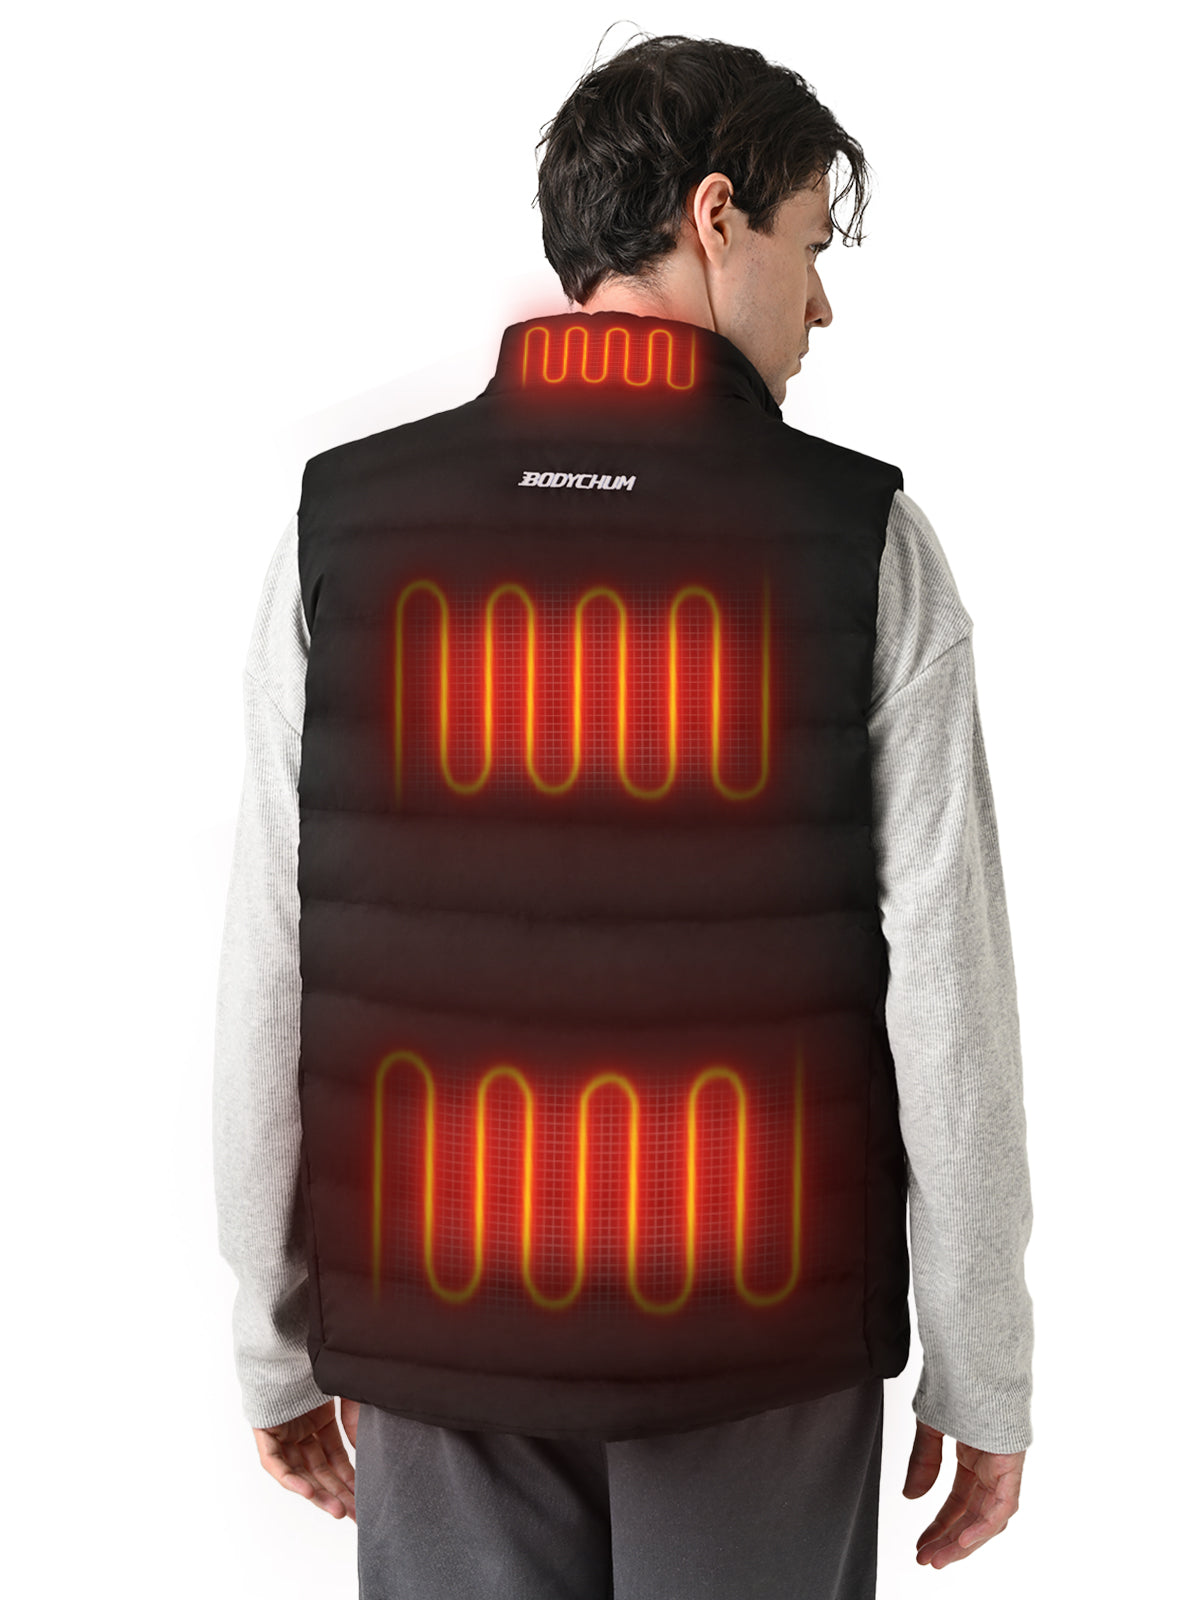 Heated Vest with Battery Pack Lightweight Washable with 6 Heating Zones for Men/Women's Christmas Day Gifts